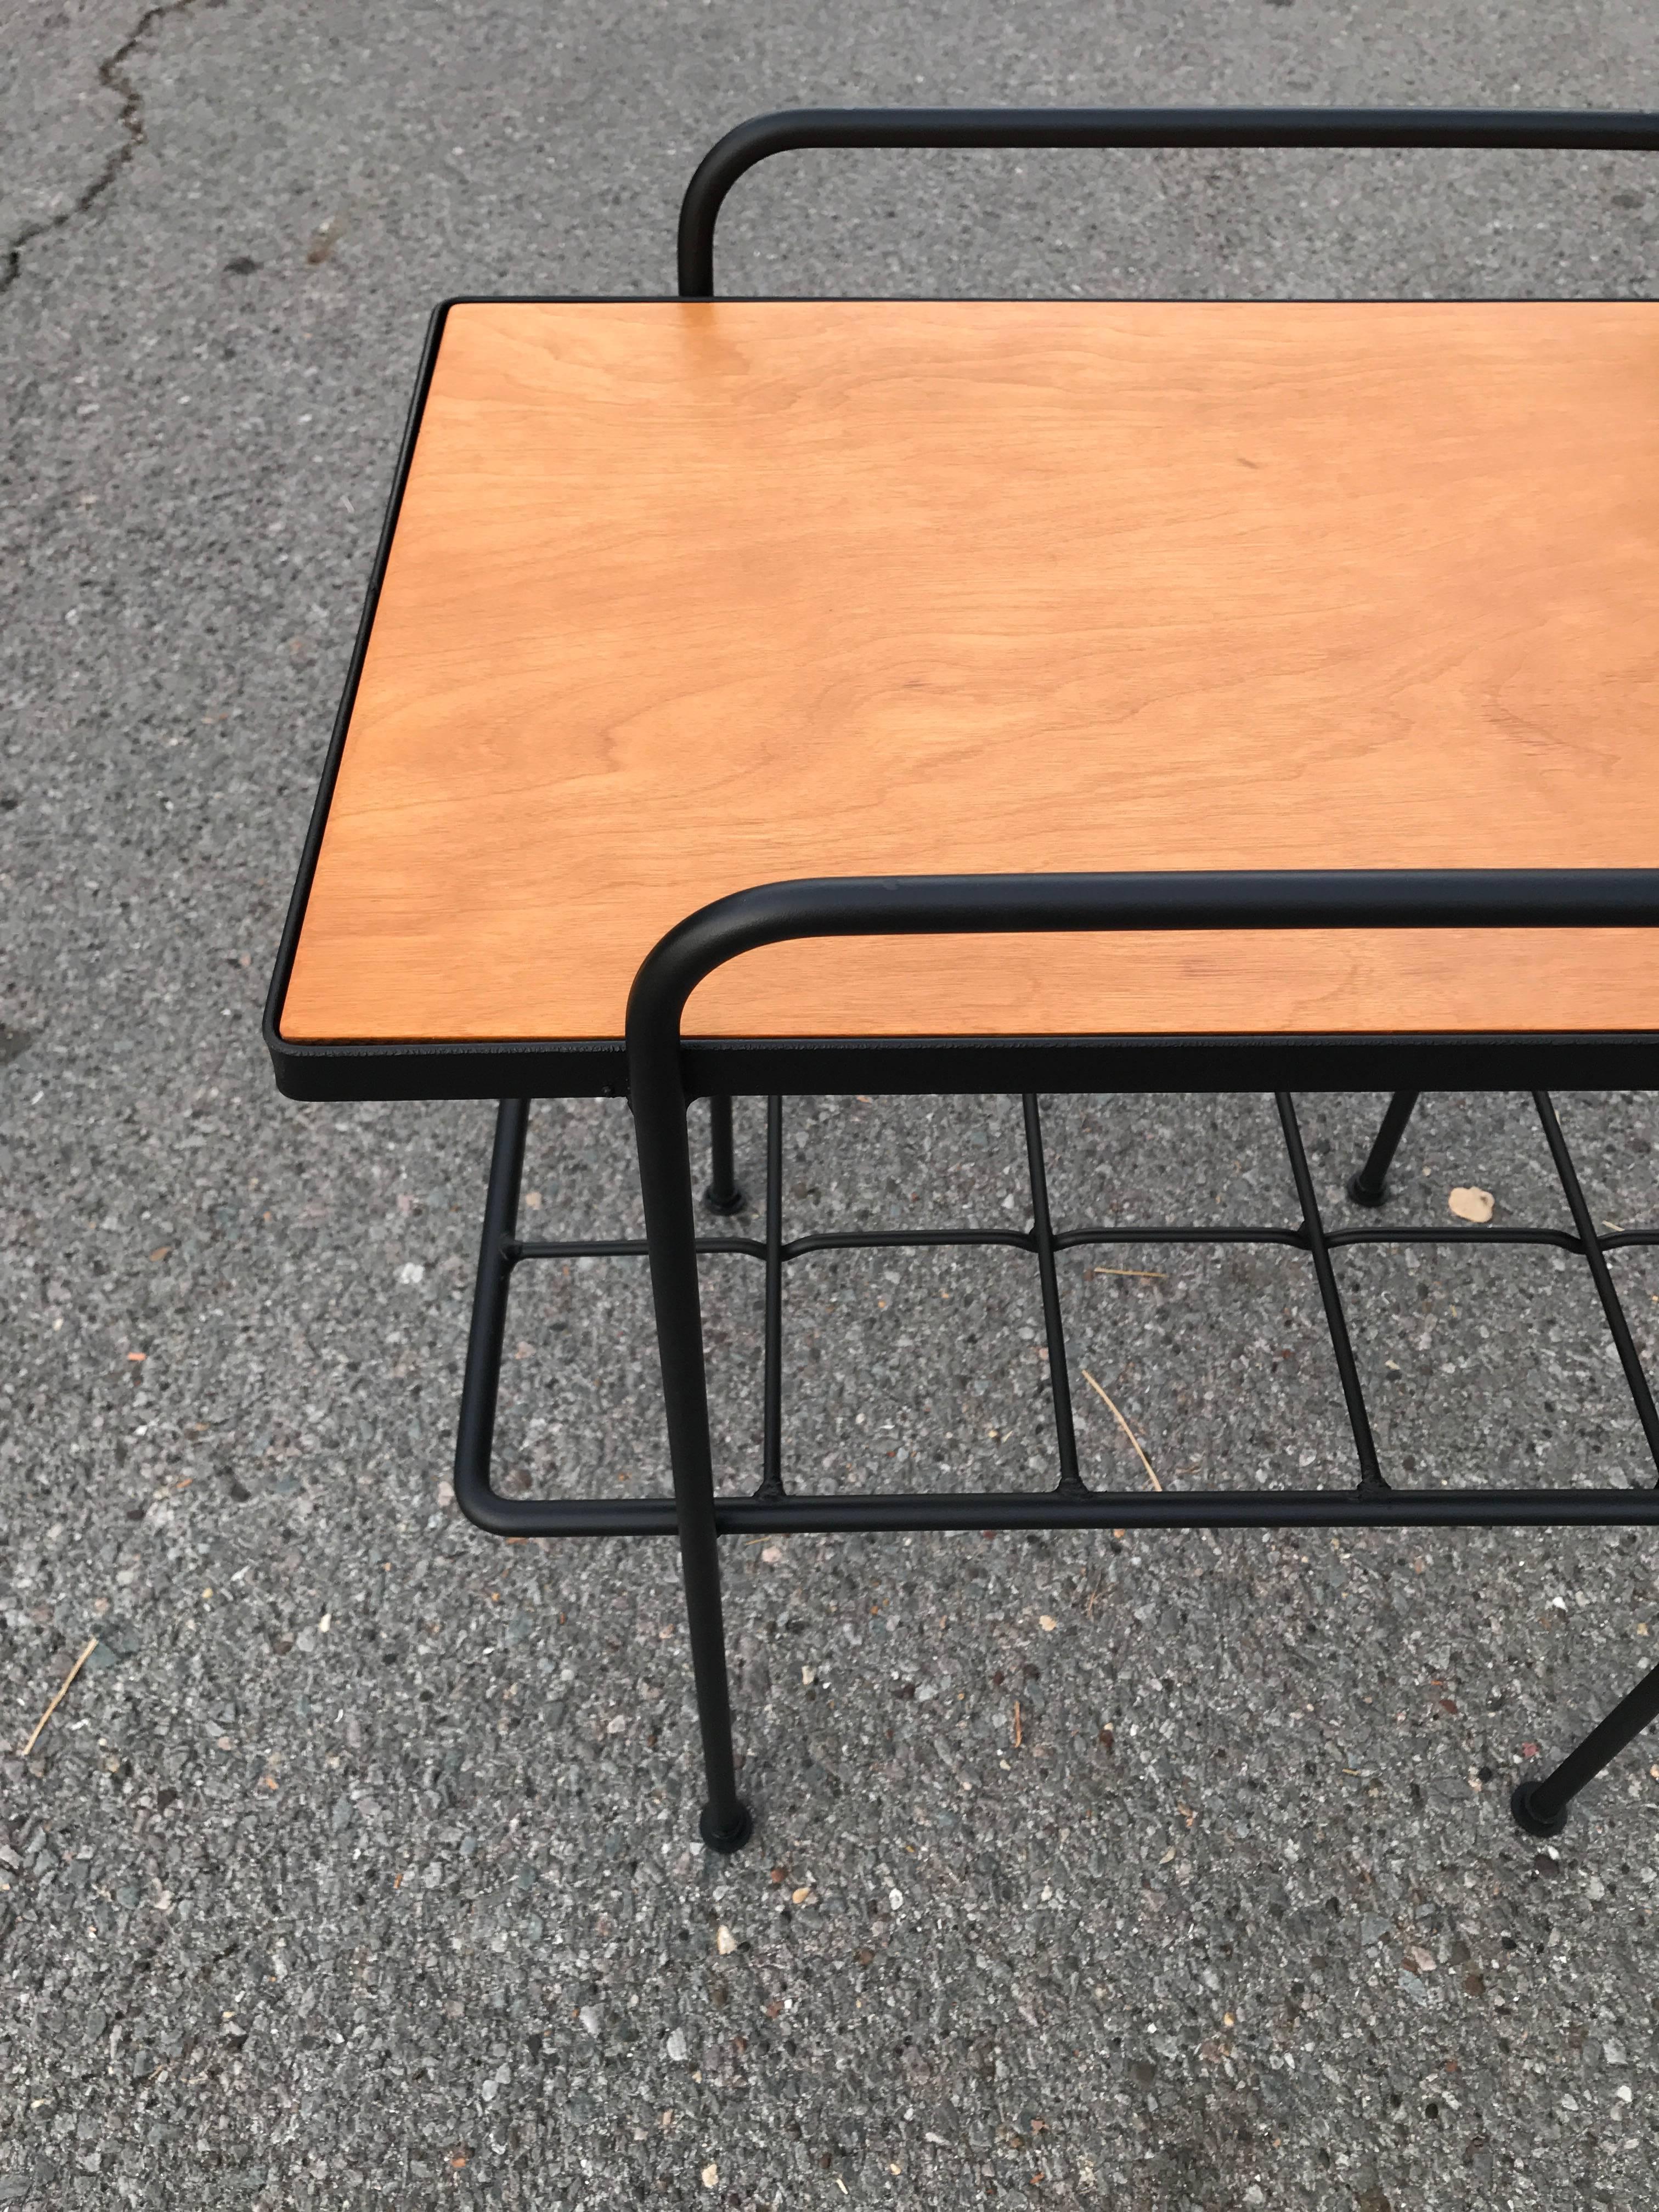 Inco Iron and Birch Side Table 1950s, California Design For Sale 3